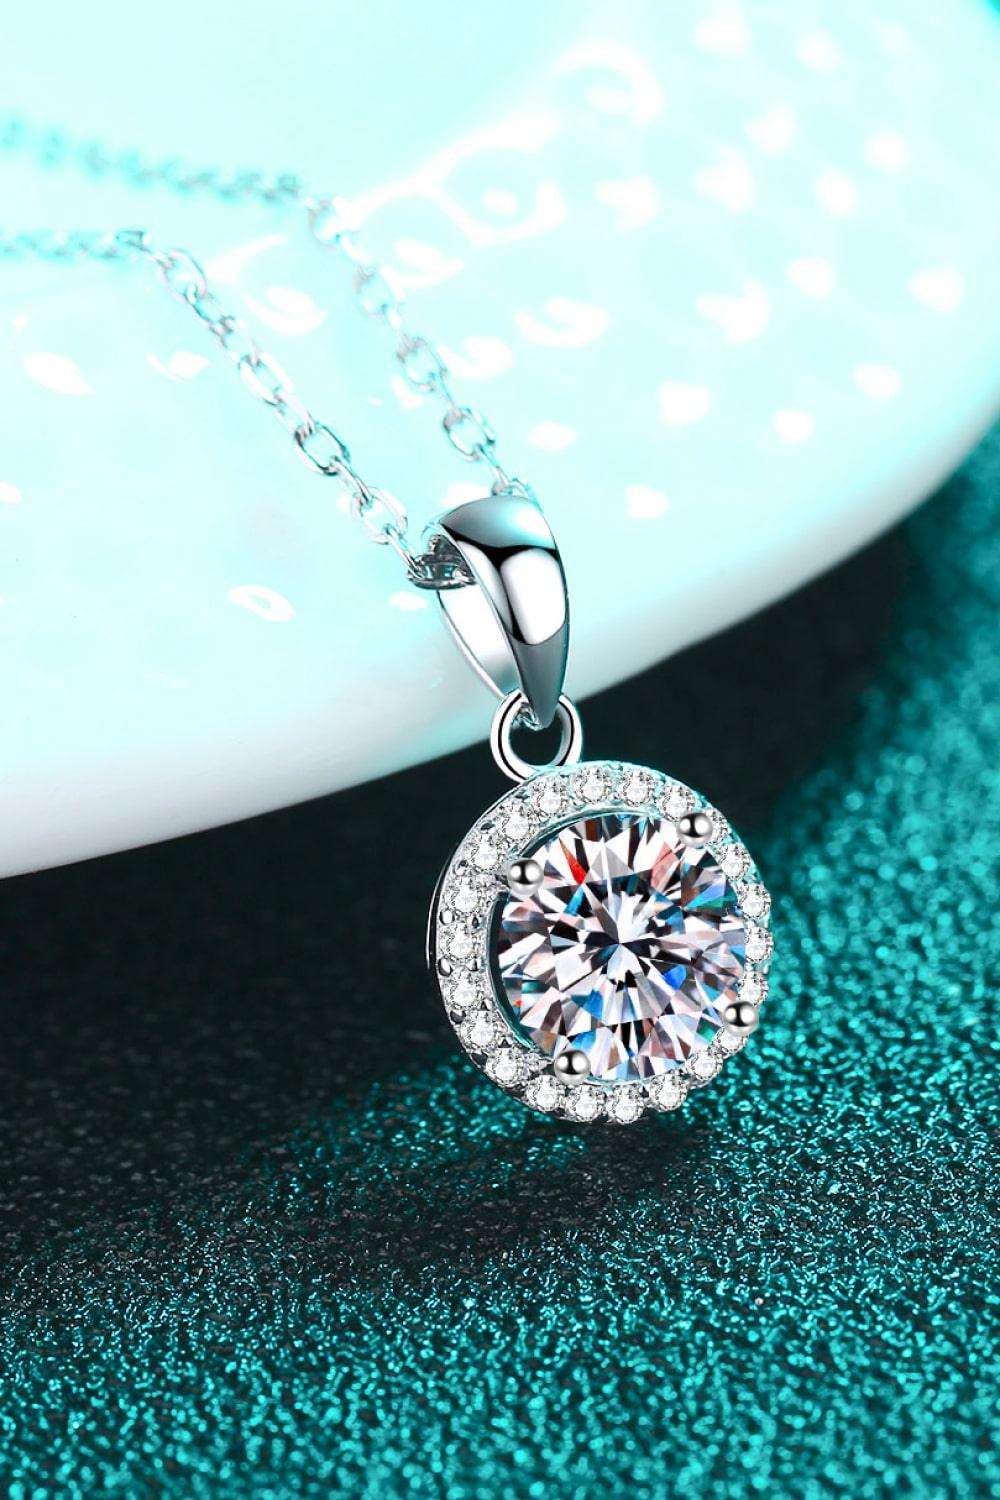 Chance to Charm 1 Carat Moissanite Round Pendant Chain Necklace - Flyclothing LLC